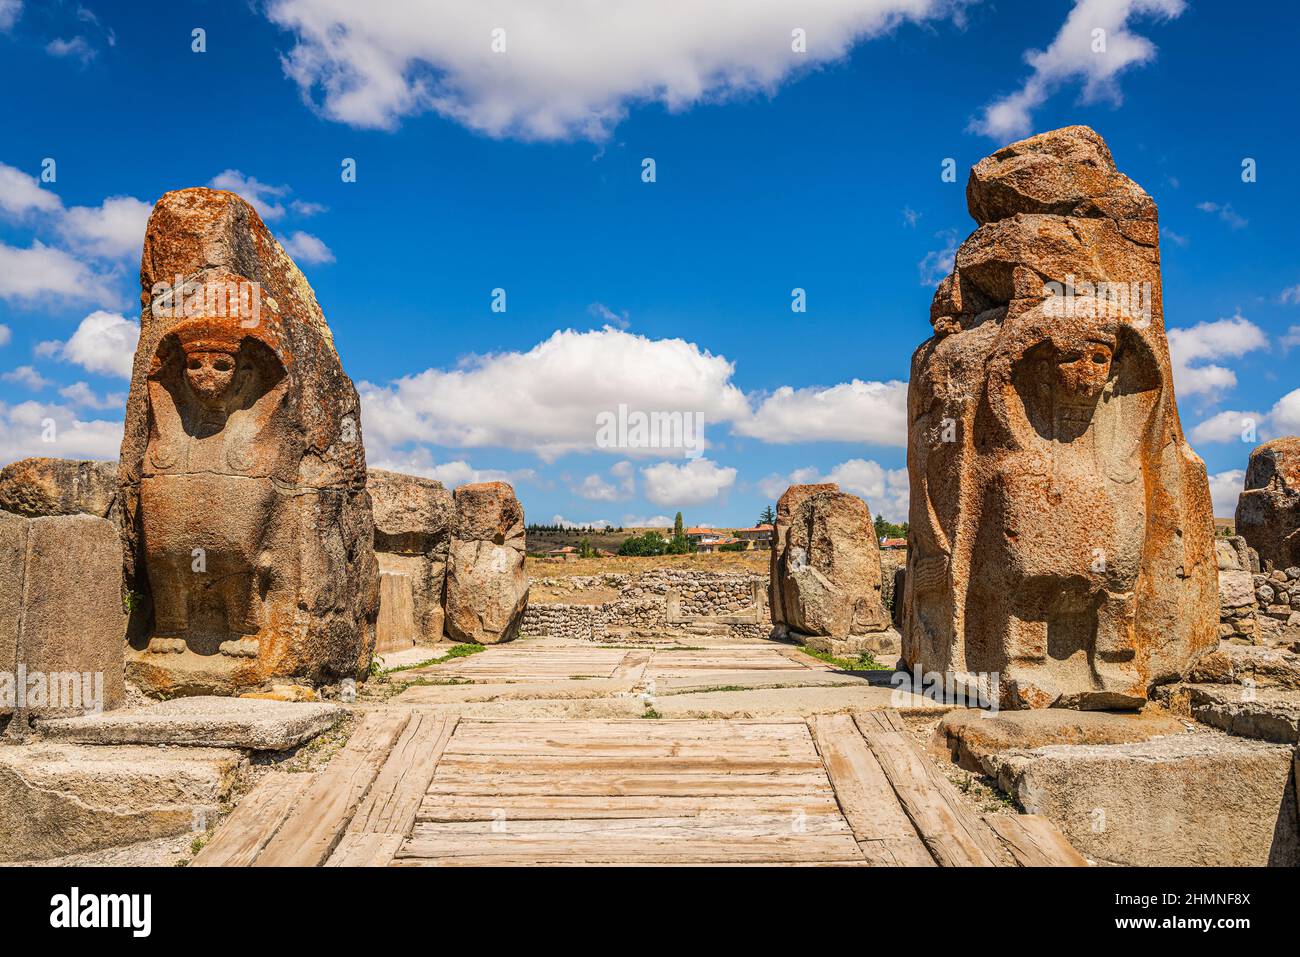 Ancient gate entrance with sphinx from the Hittite period in Alacahoyuk. Corum, Turkey. Stock Photo